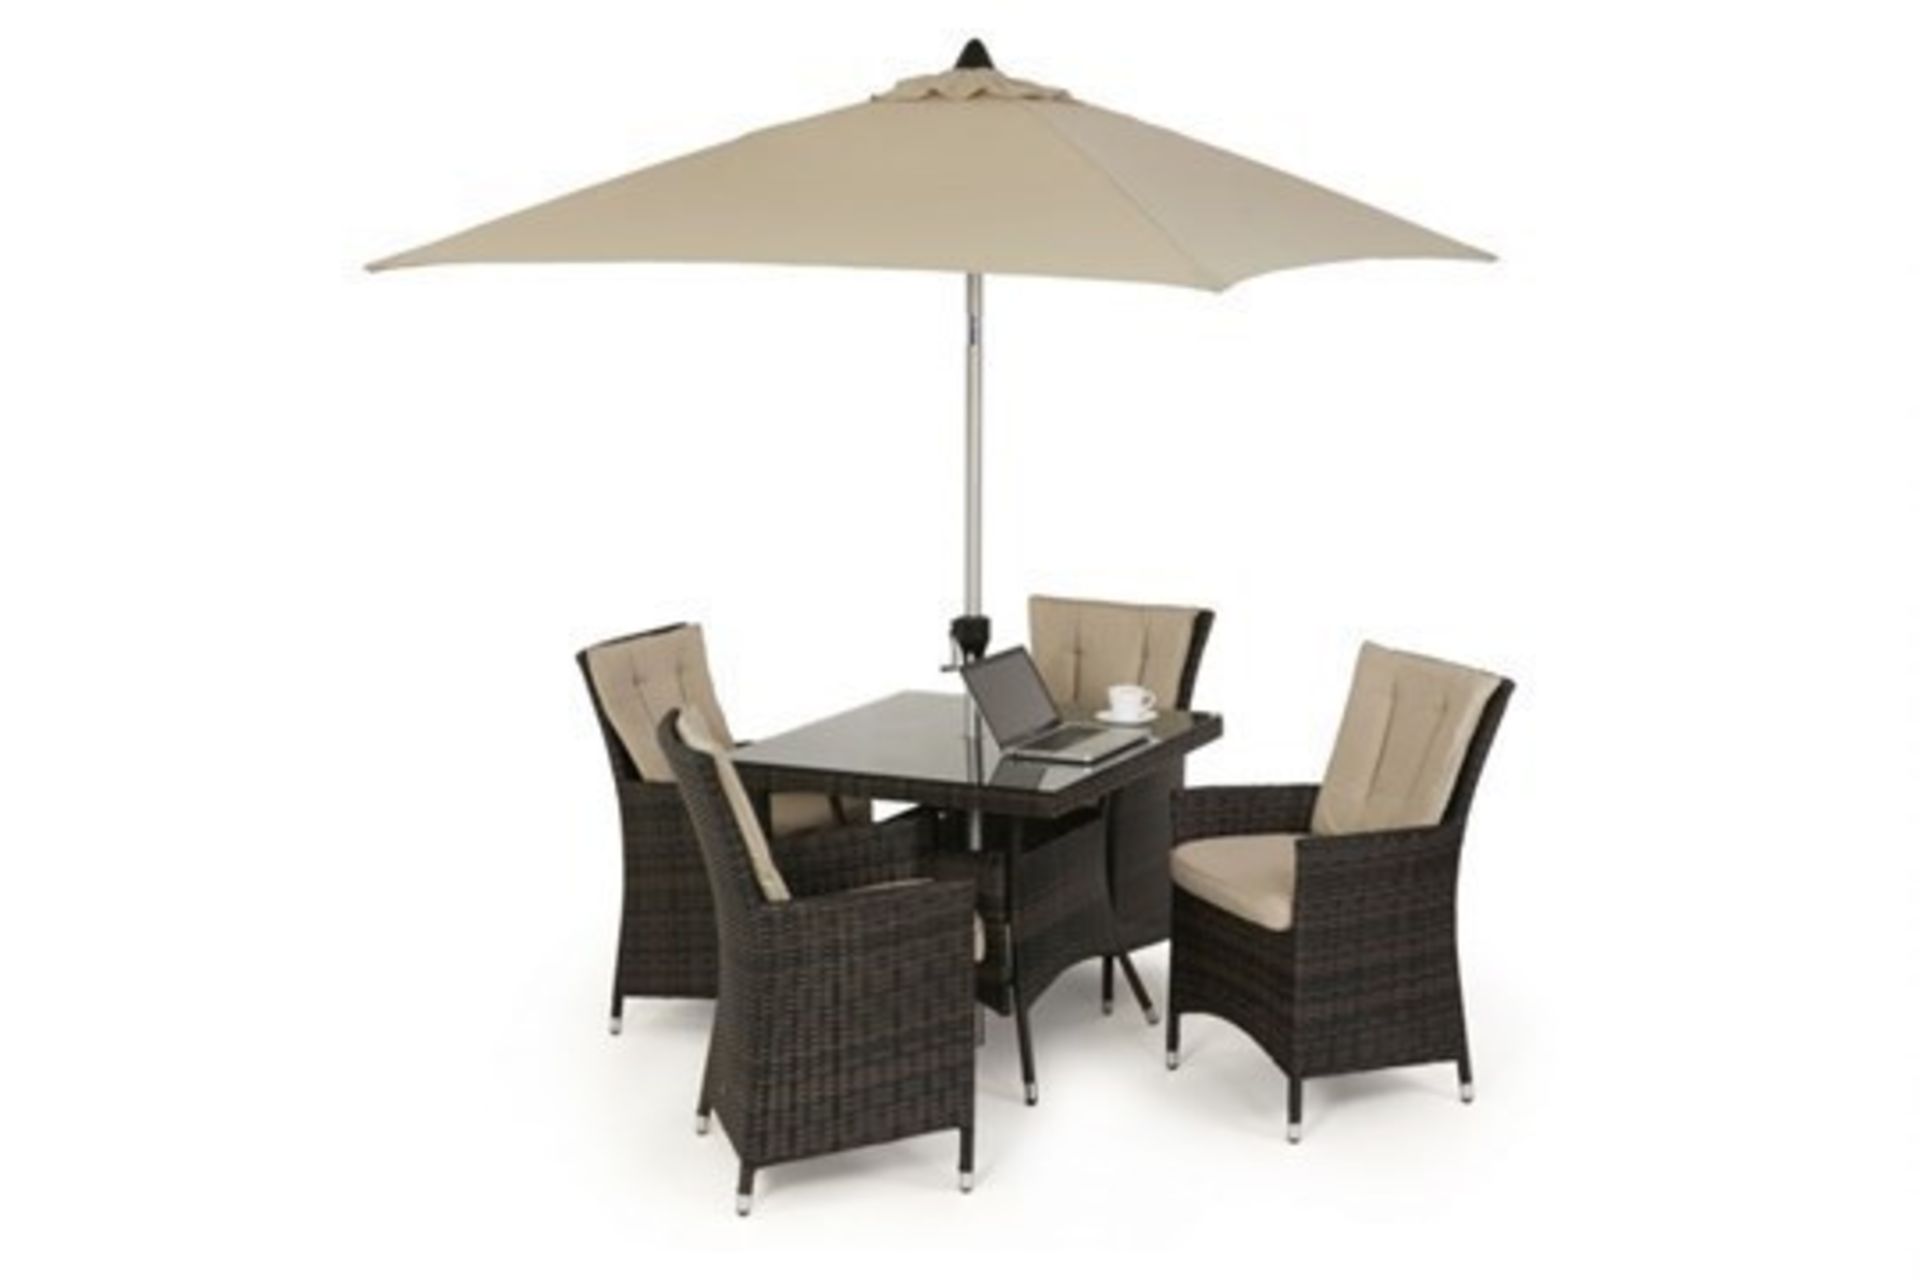 Rattan LA 4 Seat Square Outdoor Dining Set (Brown) *BRAND NEW* - Image 2 of 2